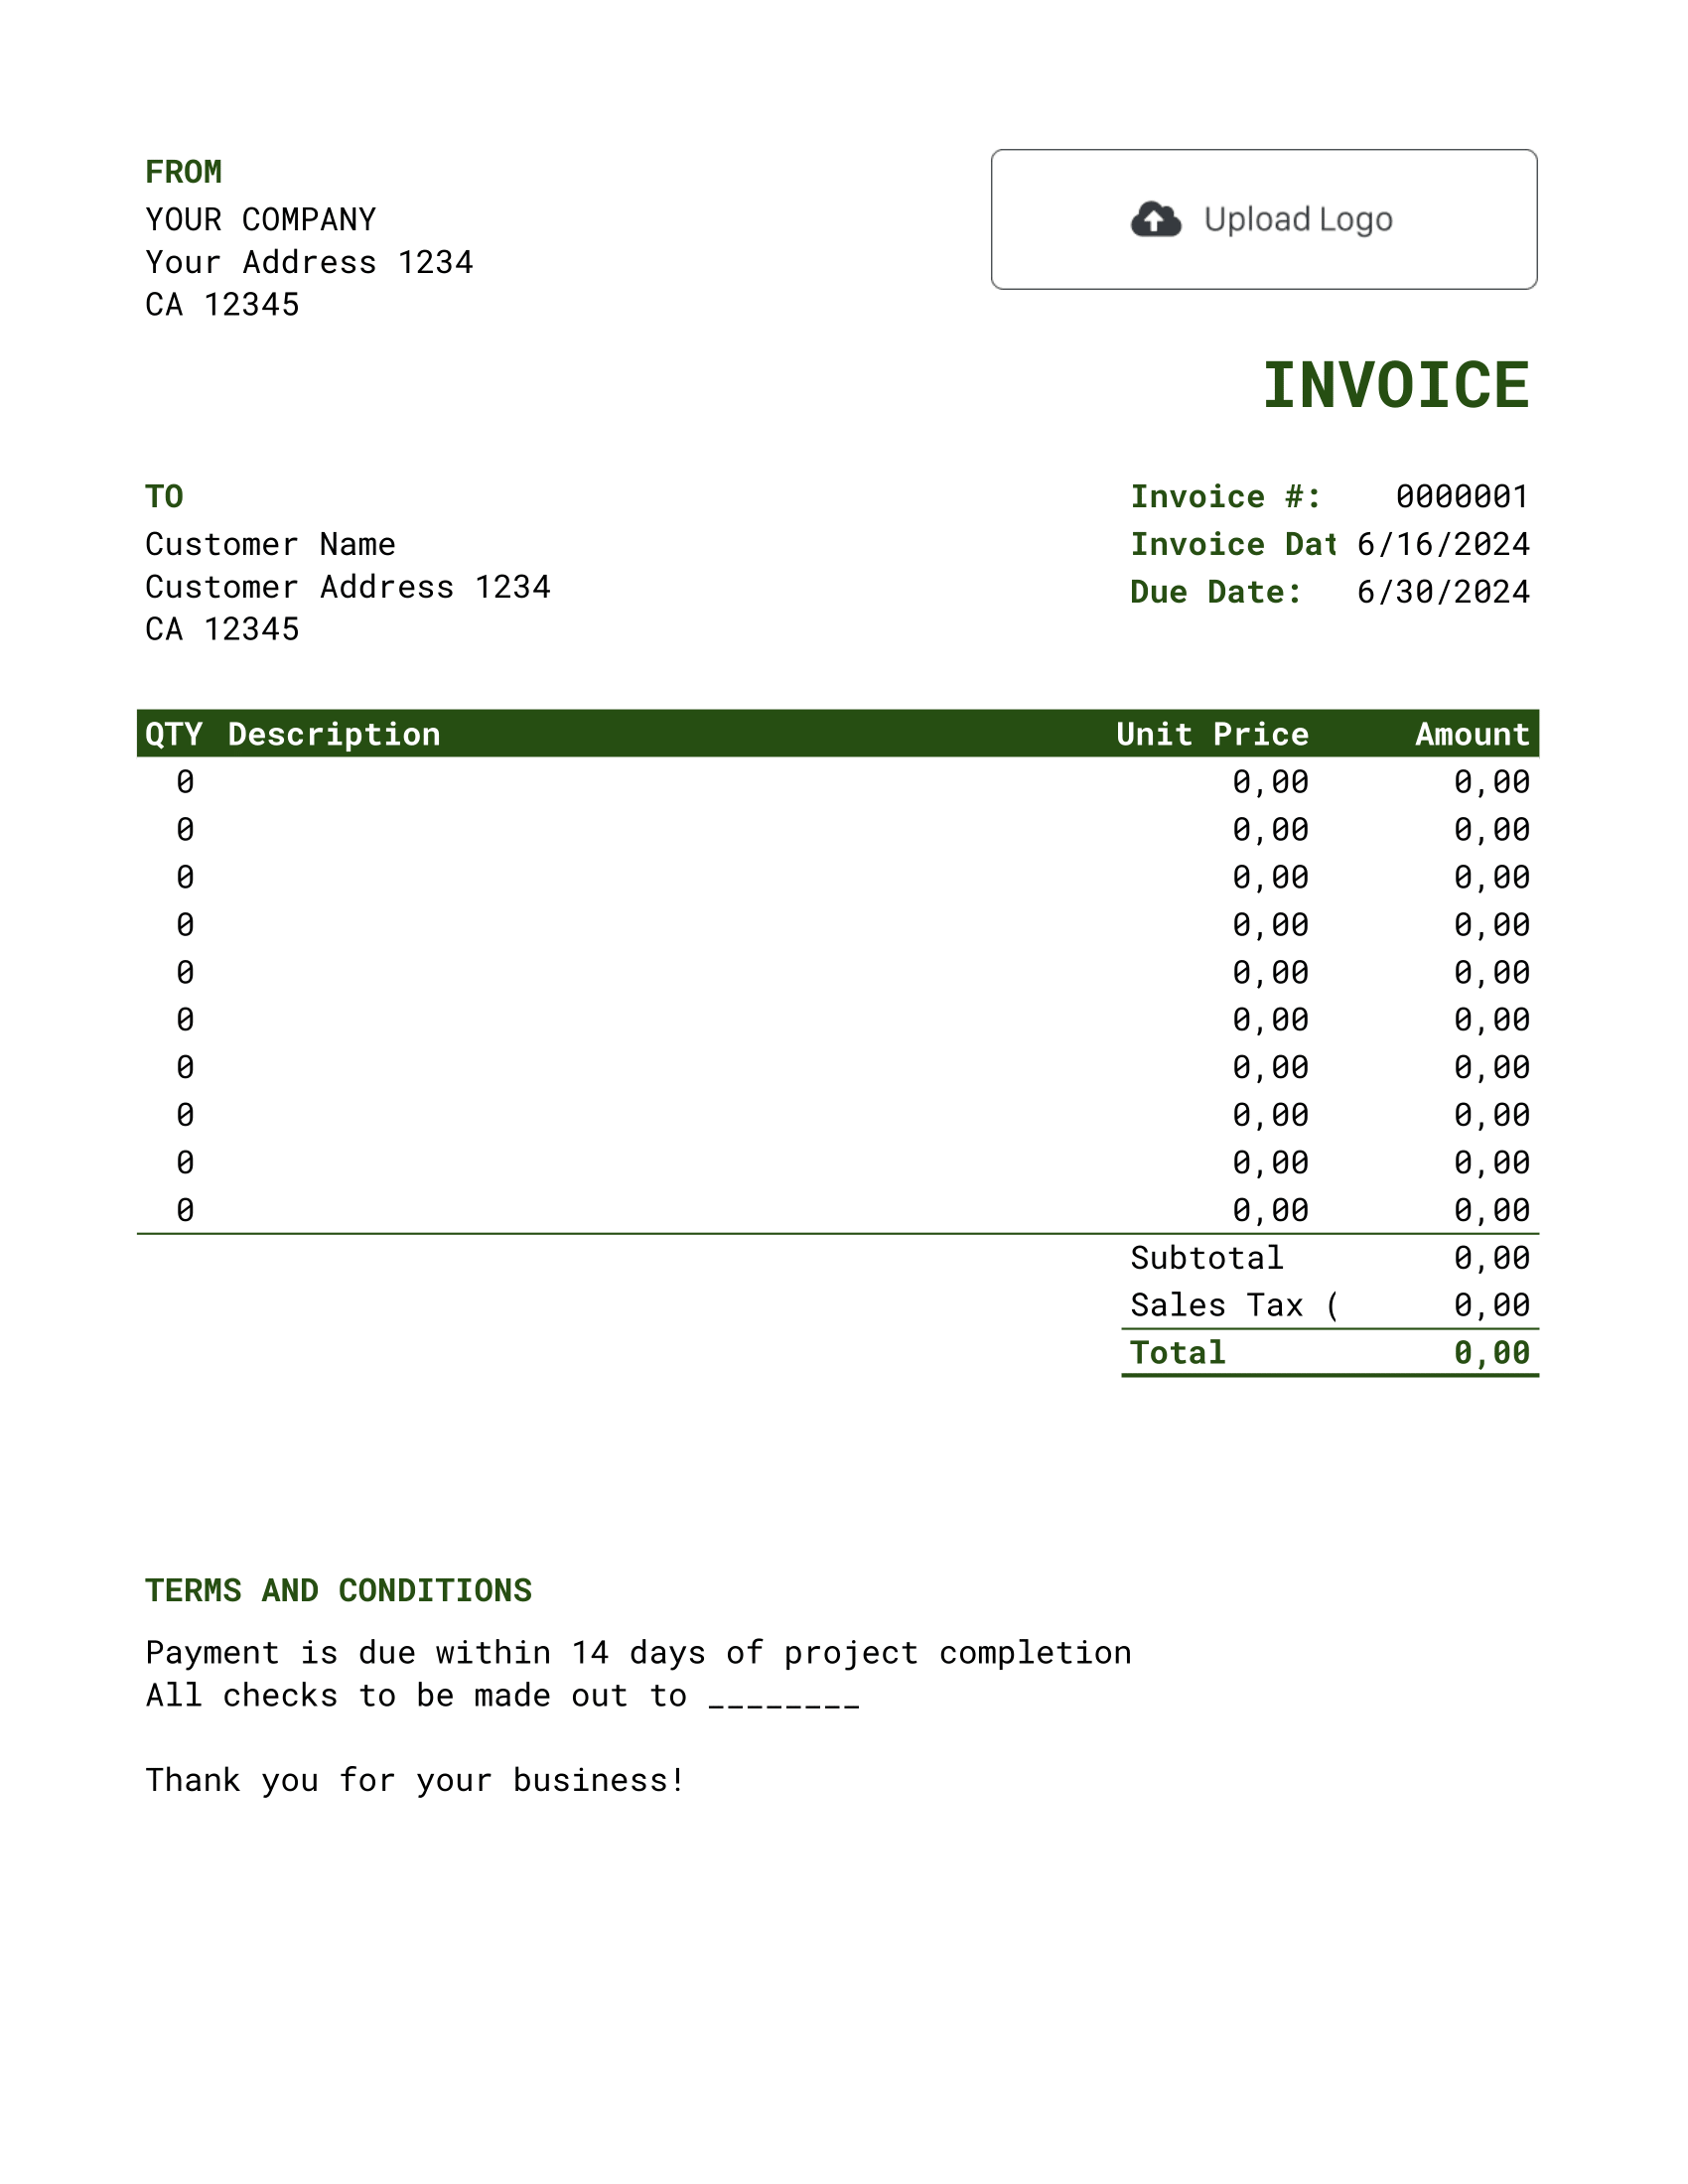 Standard Google Sheets Invoice Template